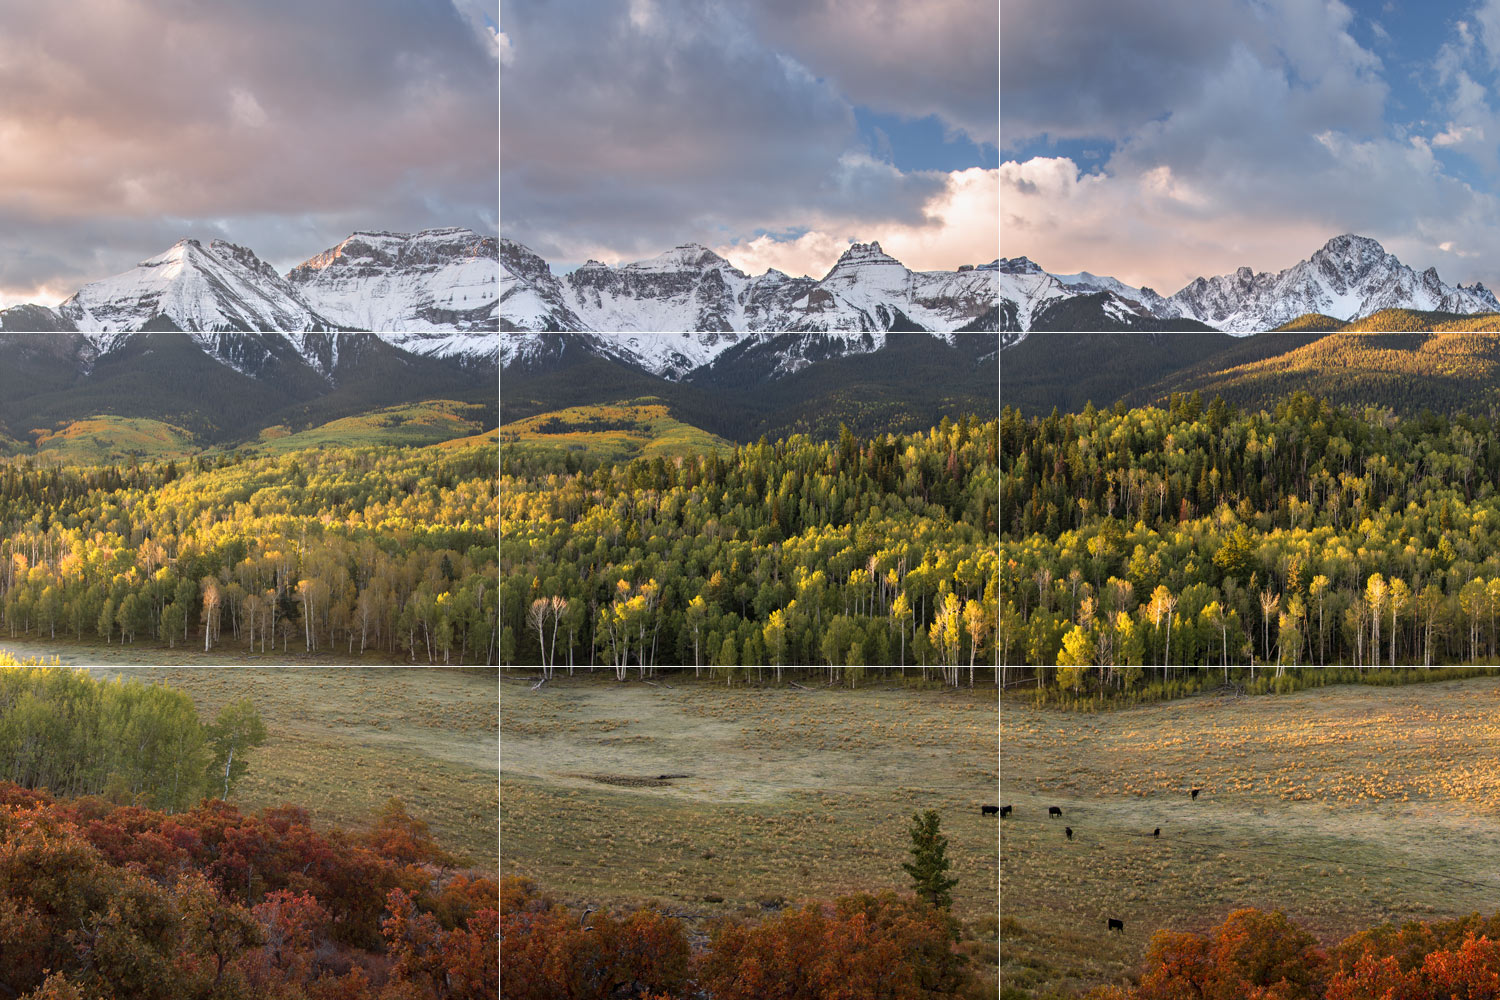 landscape photography rule of thirds